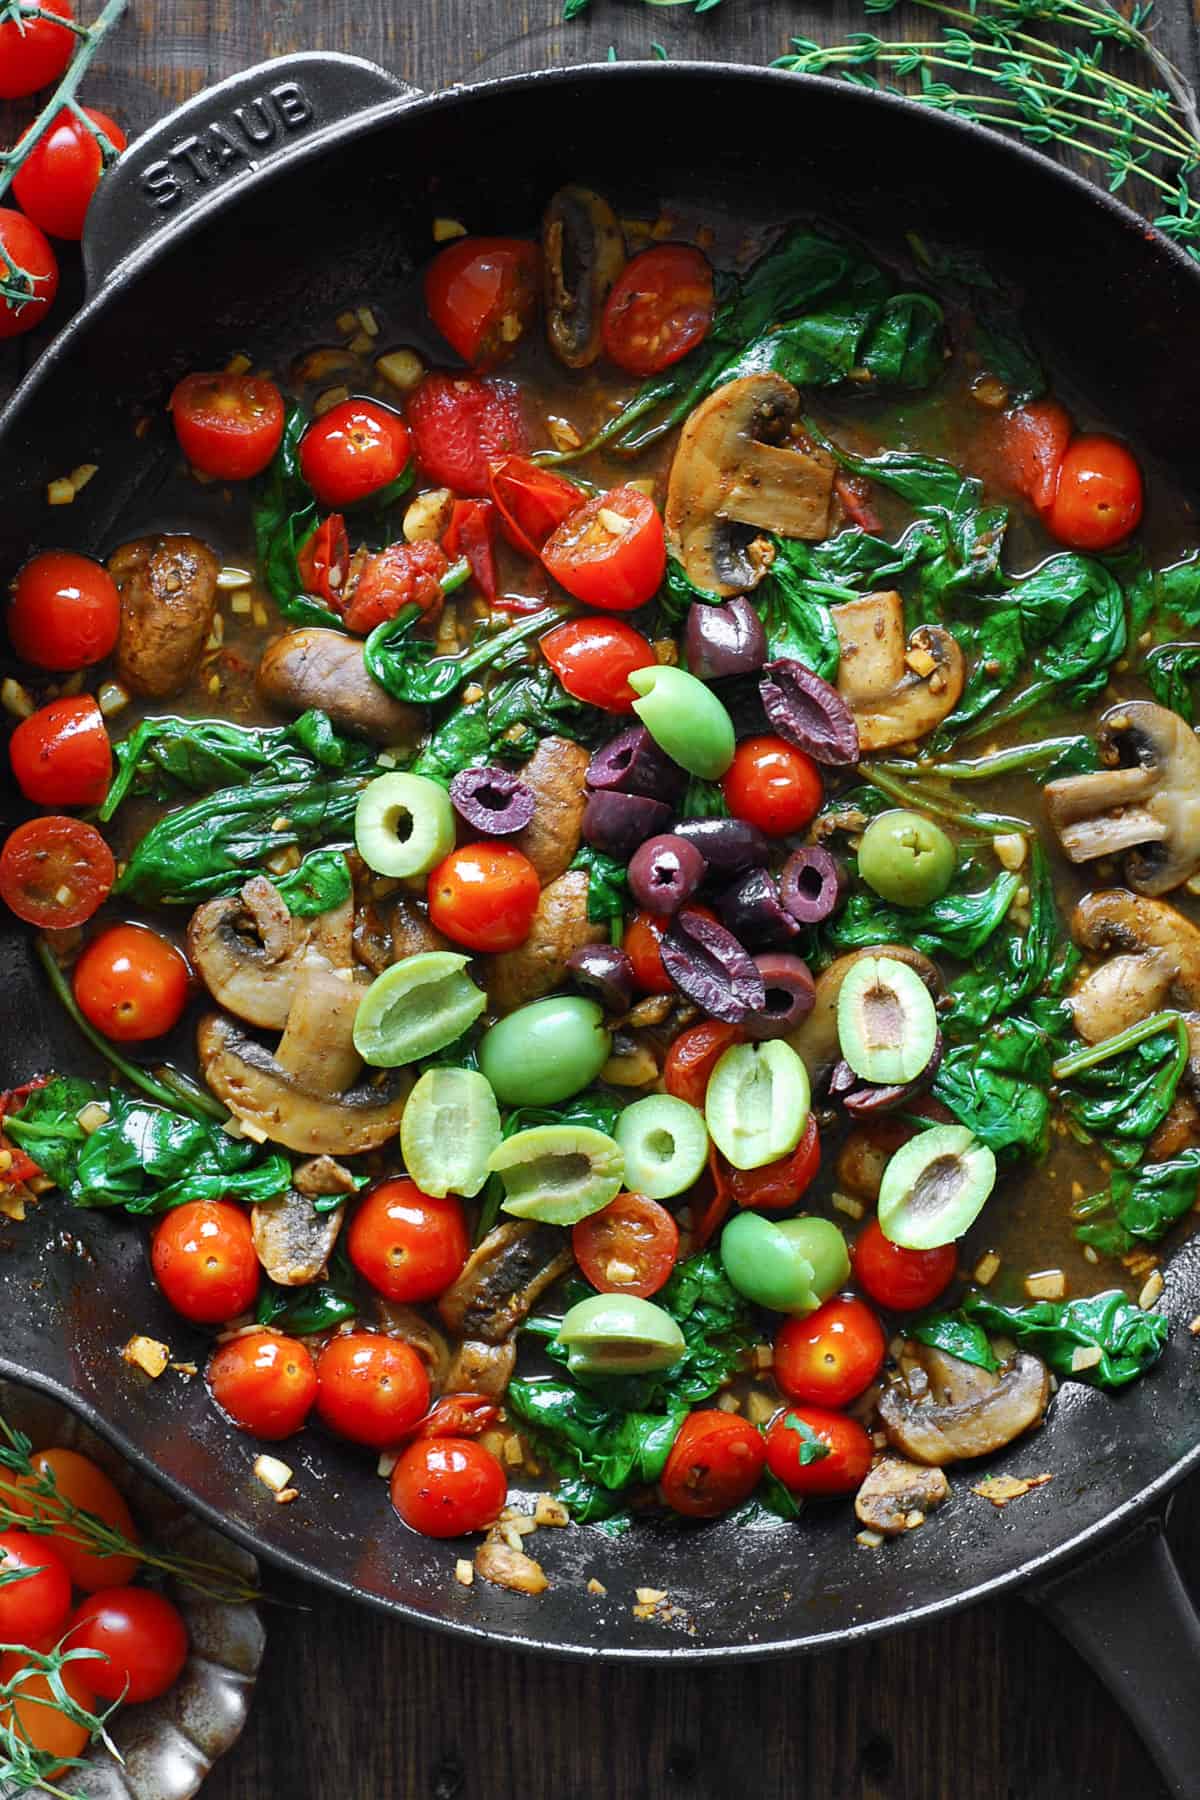 cooked tomatoes, mushrooms, wilted spinach, and sliced olives with white wine sauce in a cast iron skillet.